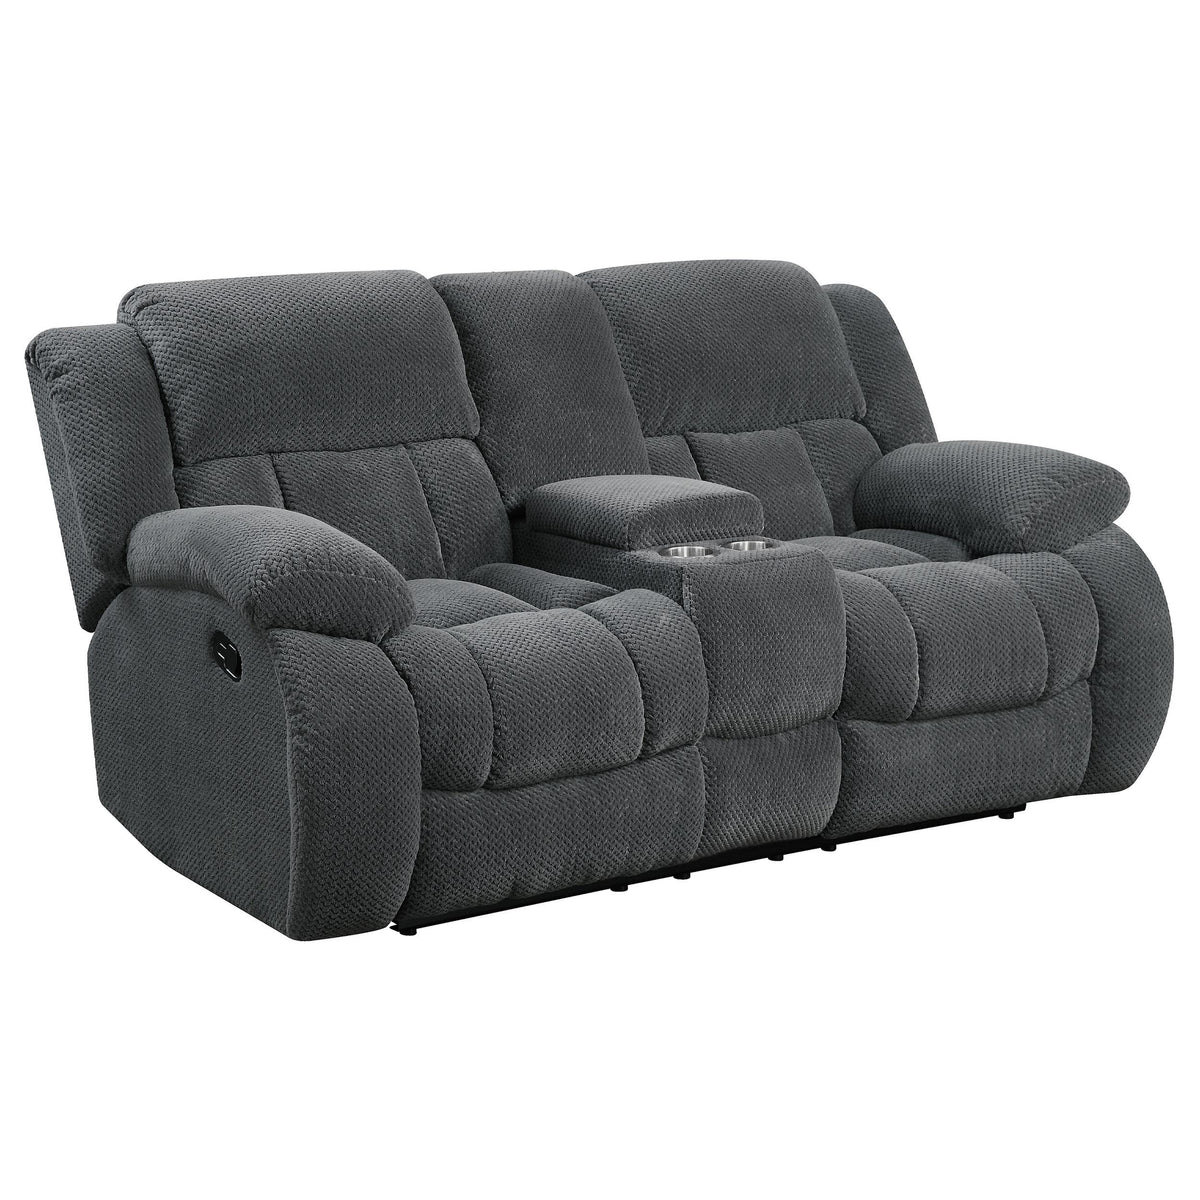 Weissman Motion Loveseat with Console Charcoal  Las Vegas Furniture Stores